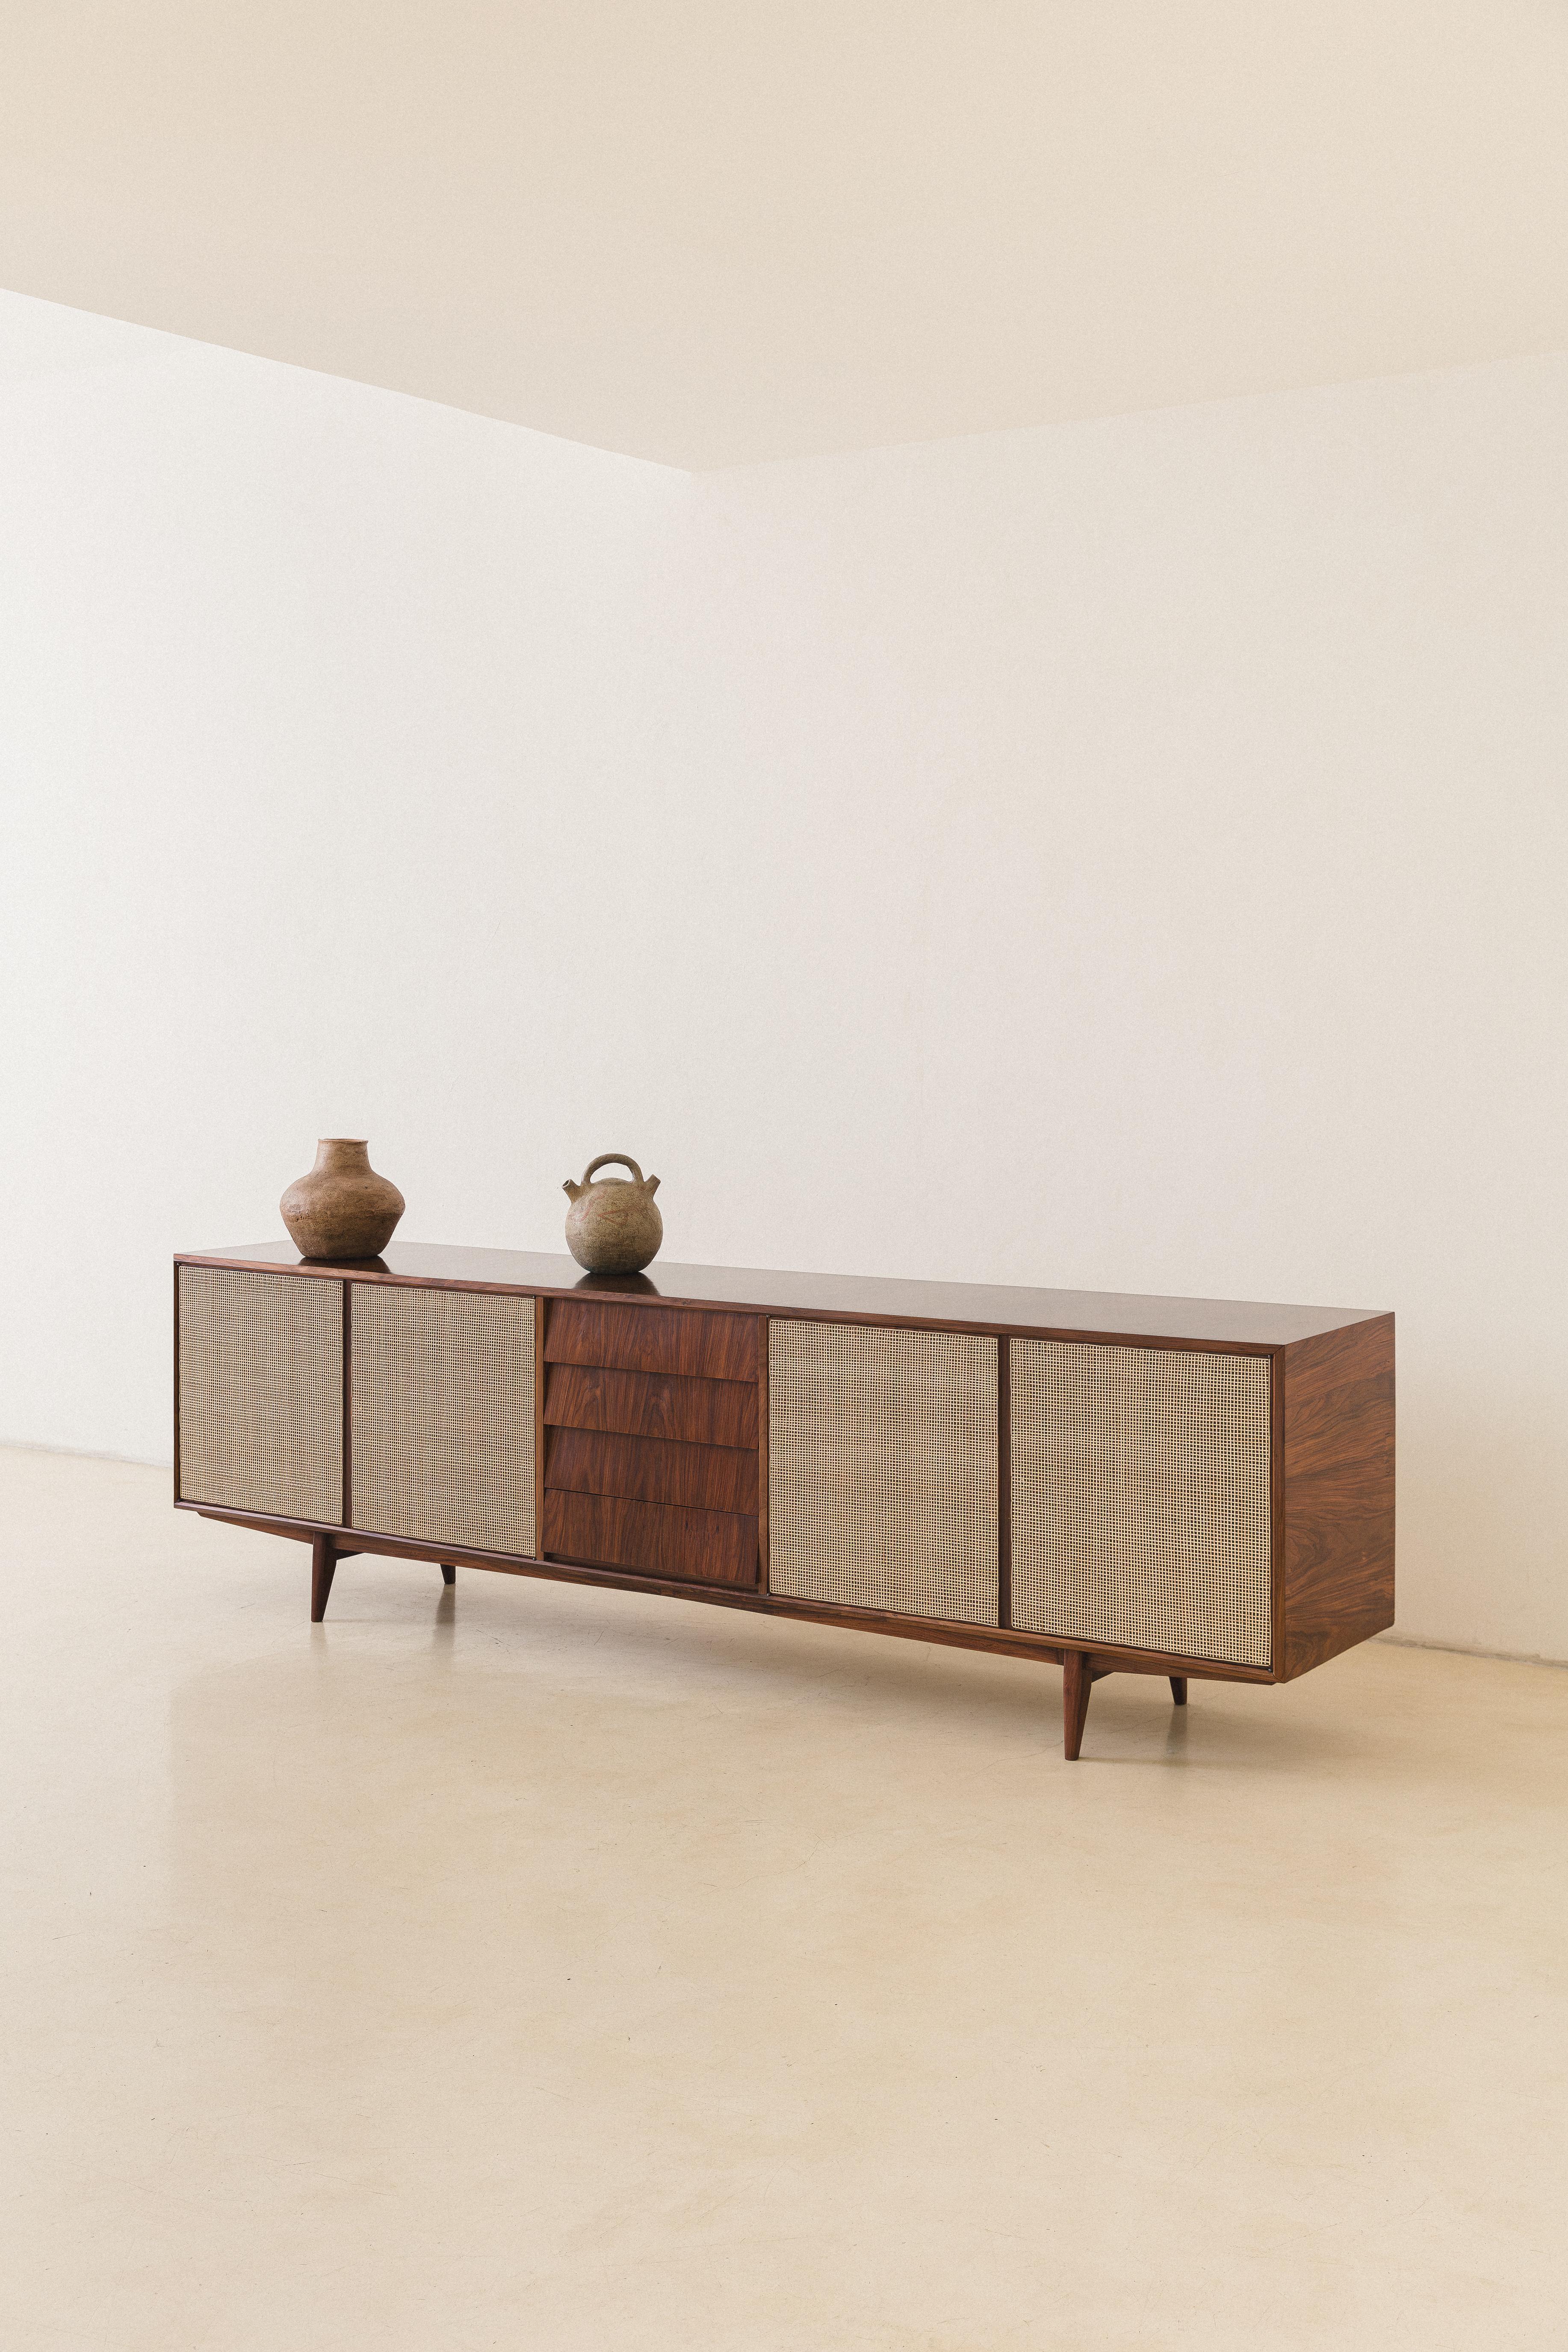 This Credenza was produced by the Brazilian company Tapeçaria Schulz S.A in the 1950s, capturing the eye. 

Made of solid Caviuna and cane, it has four-door compartments and four carefully made drawers. The item showcases distinctive construction